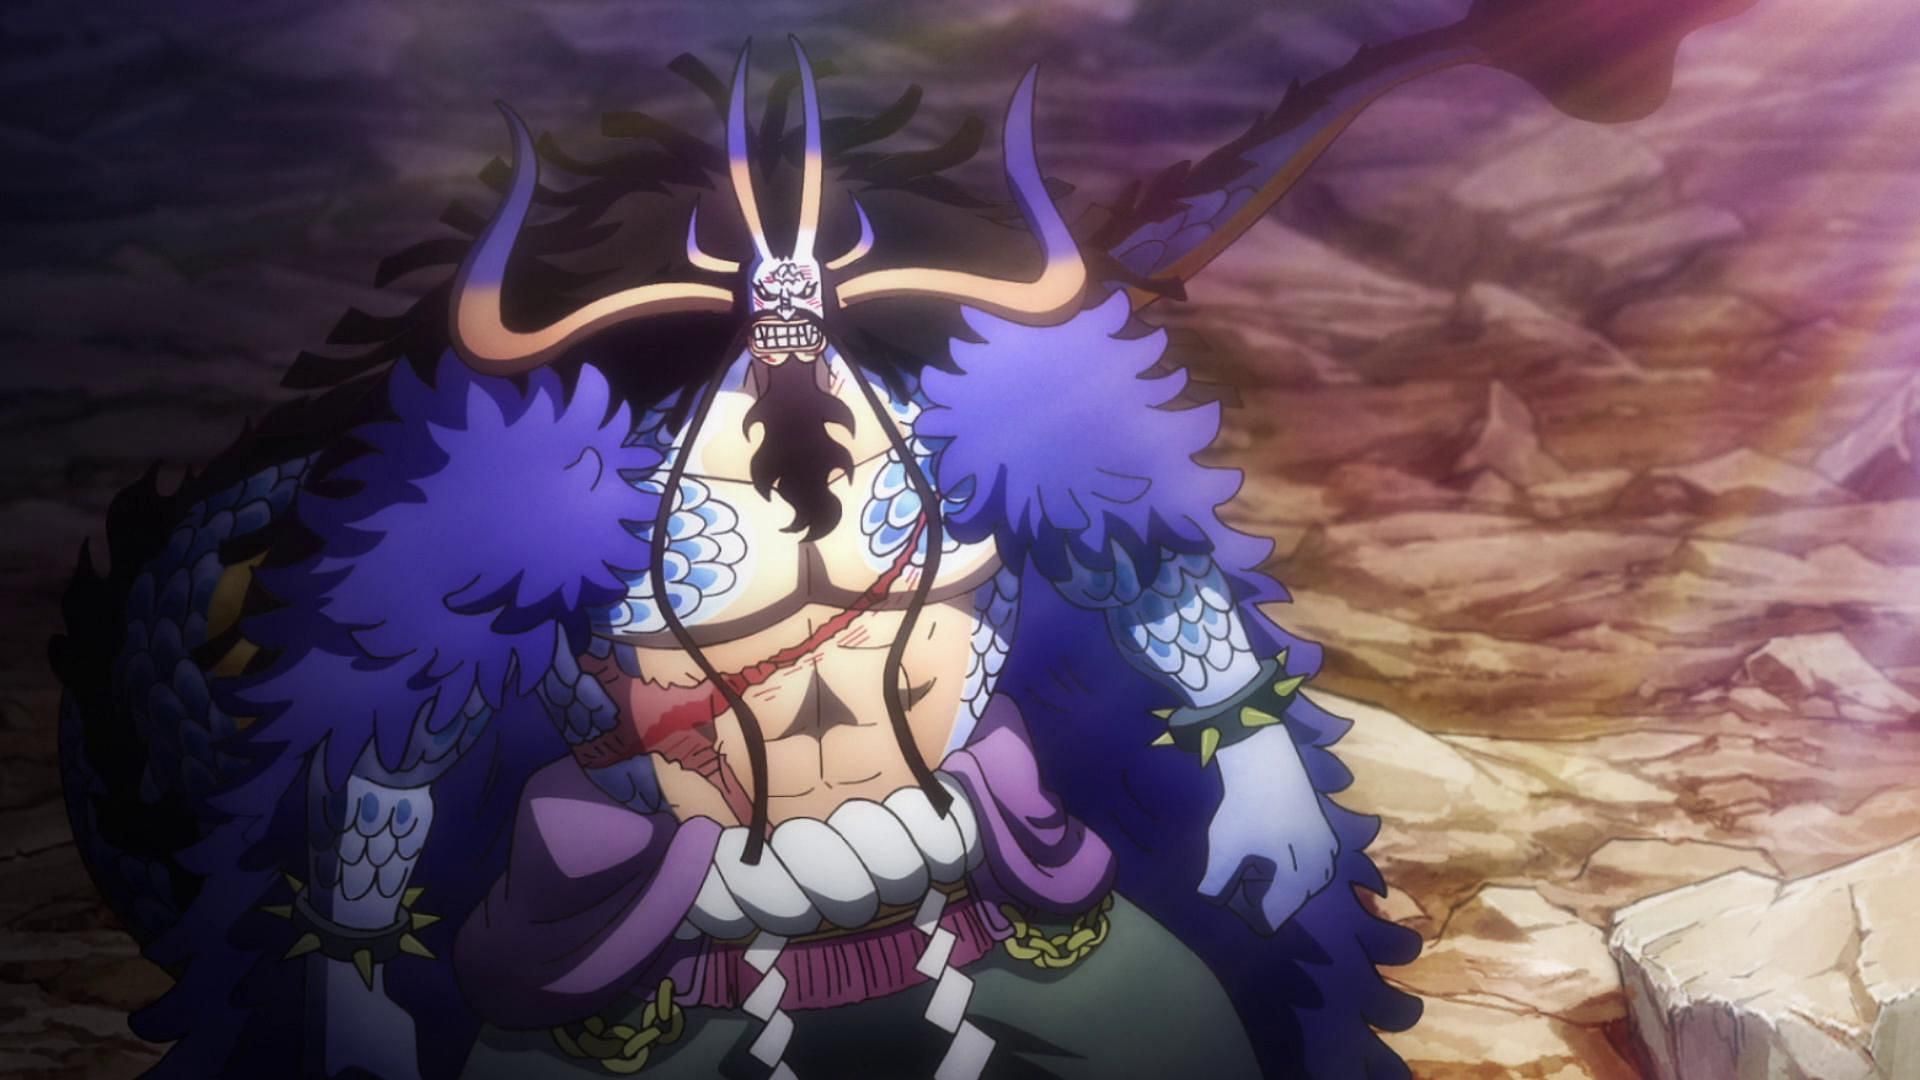 Kaido as seen in One Piece (Image via Toei Animation, One Piece)